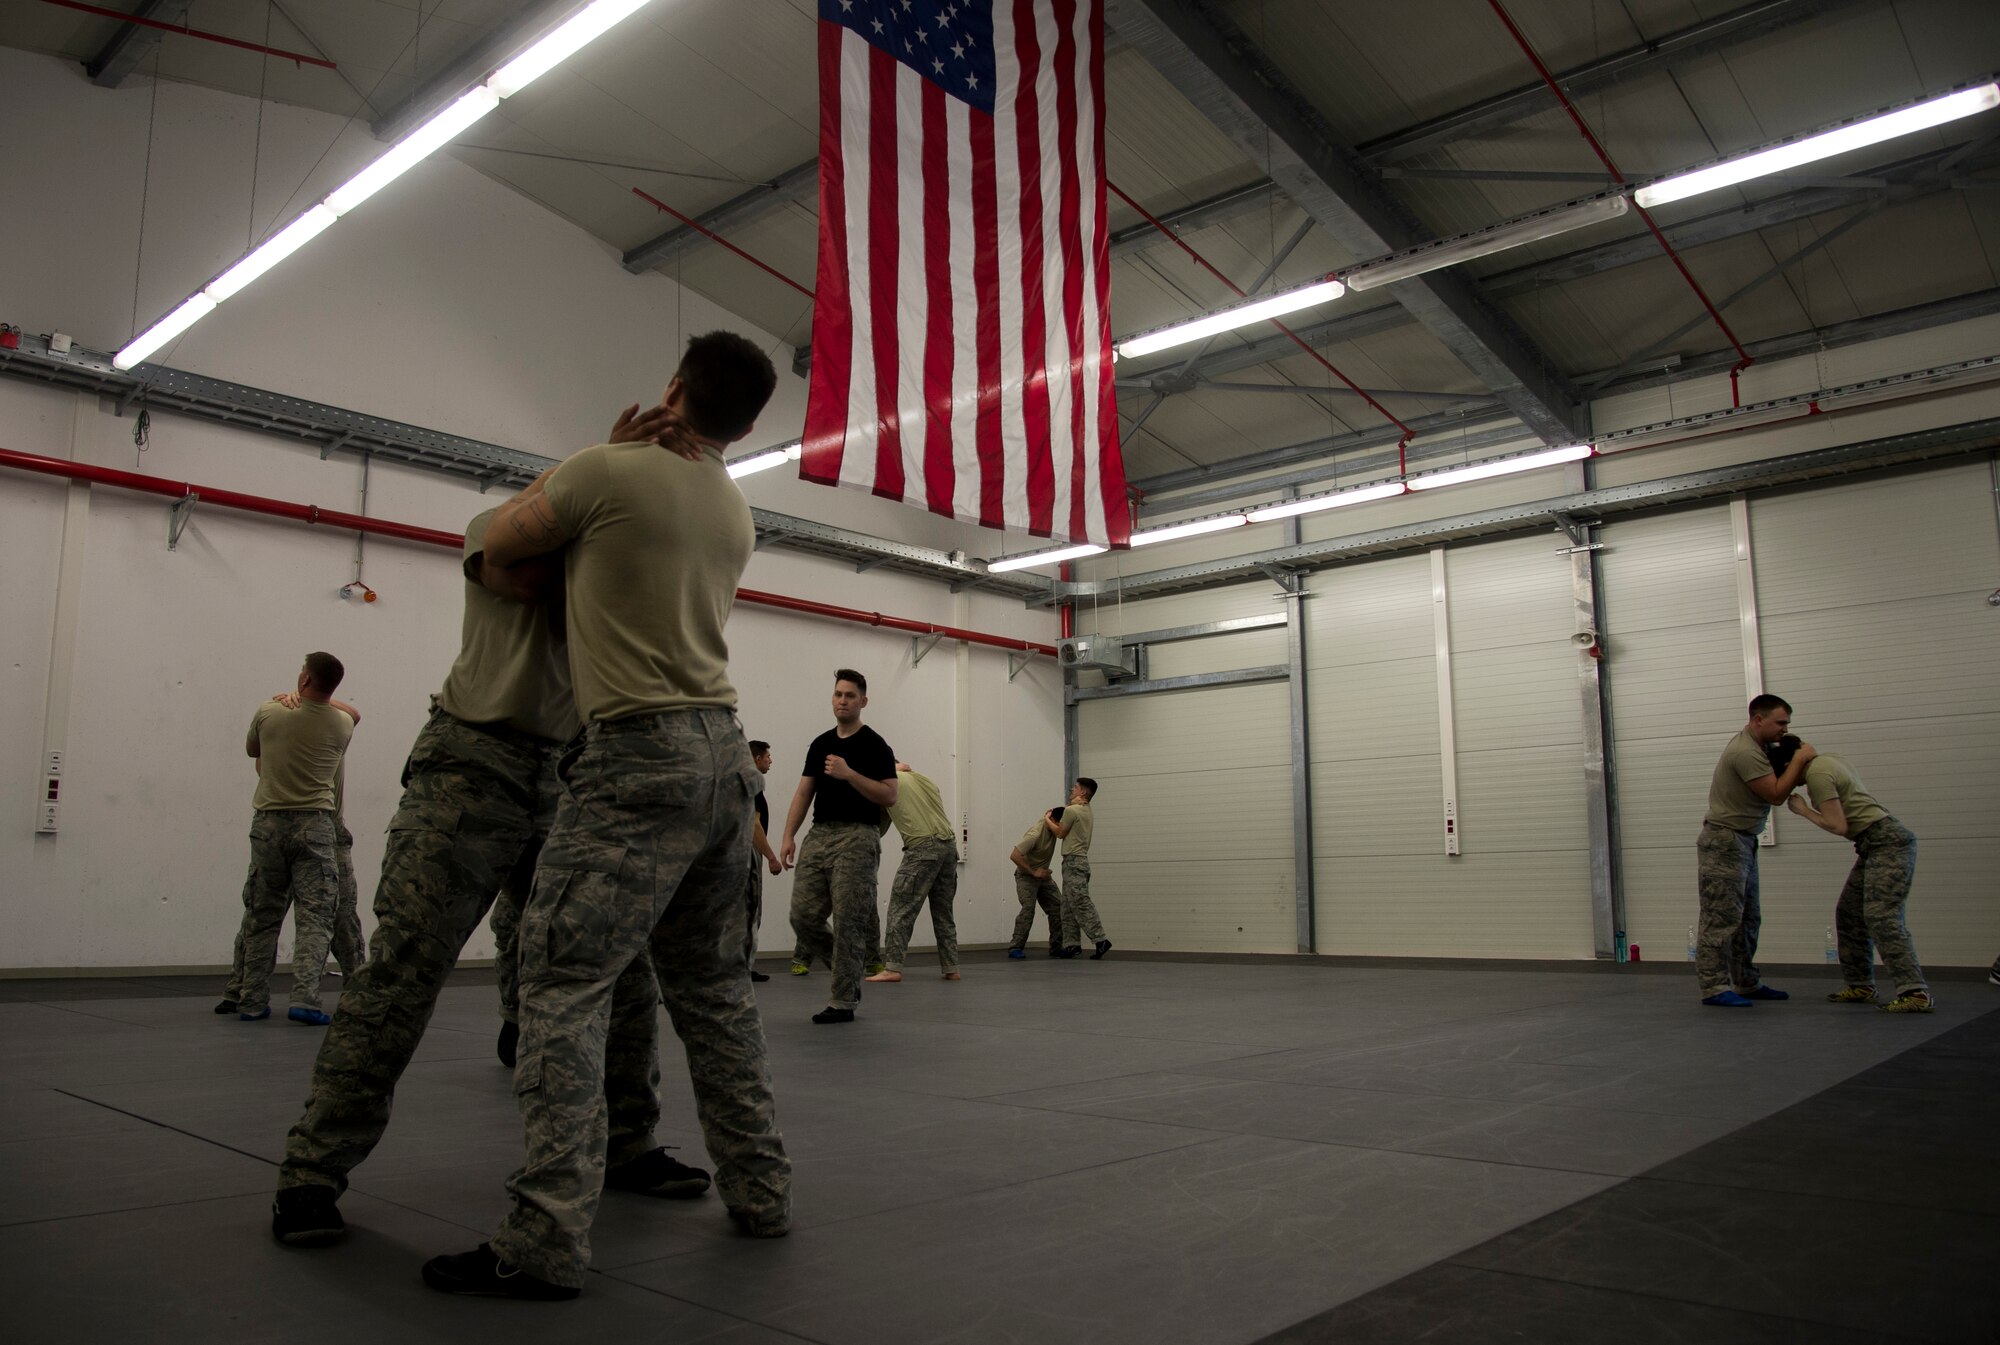 Security forces Airmen practice self-defense maneuvers during a Security Forces combative course Jan. 14, 2016, at Ramstein Air Base, Germany. Approximately 21 students attended the seven-day course to improve weapon retention and self-defense skills which can be used to handle hostile situations in the most peaceful means necessary. (U.S. Air Force photo/Senior Airman Jonathan Stefanko)